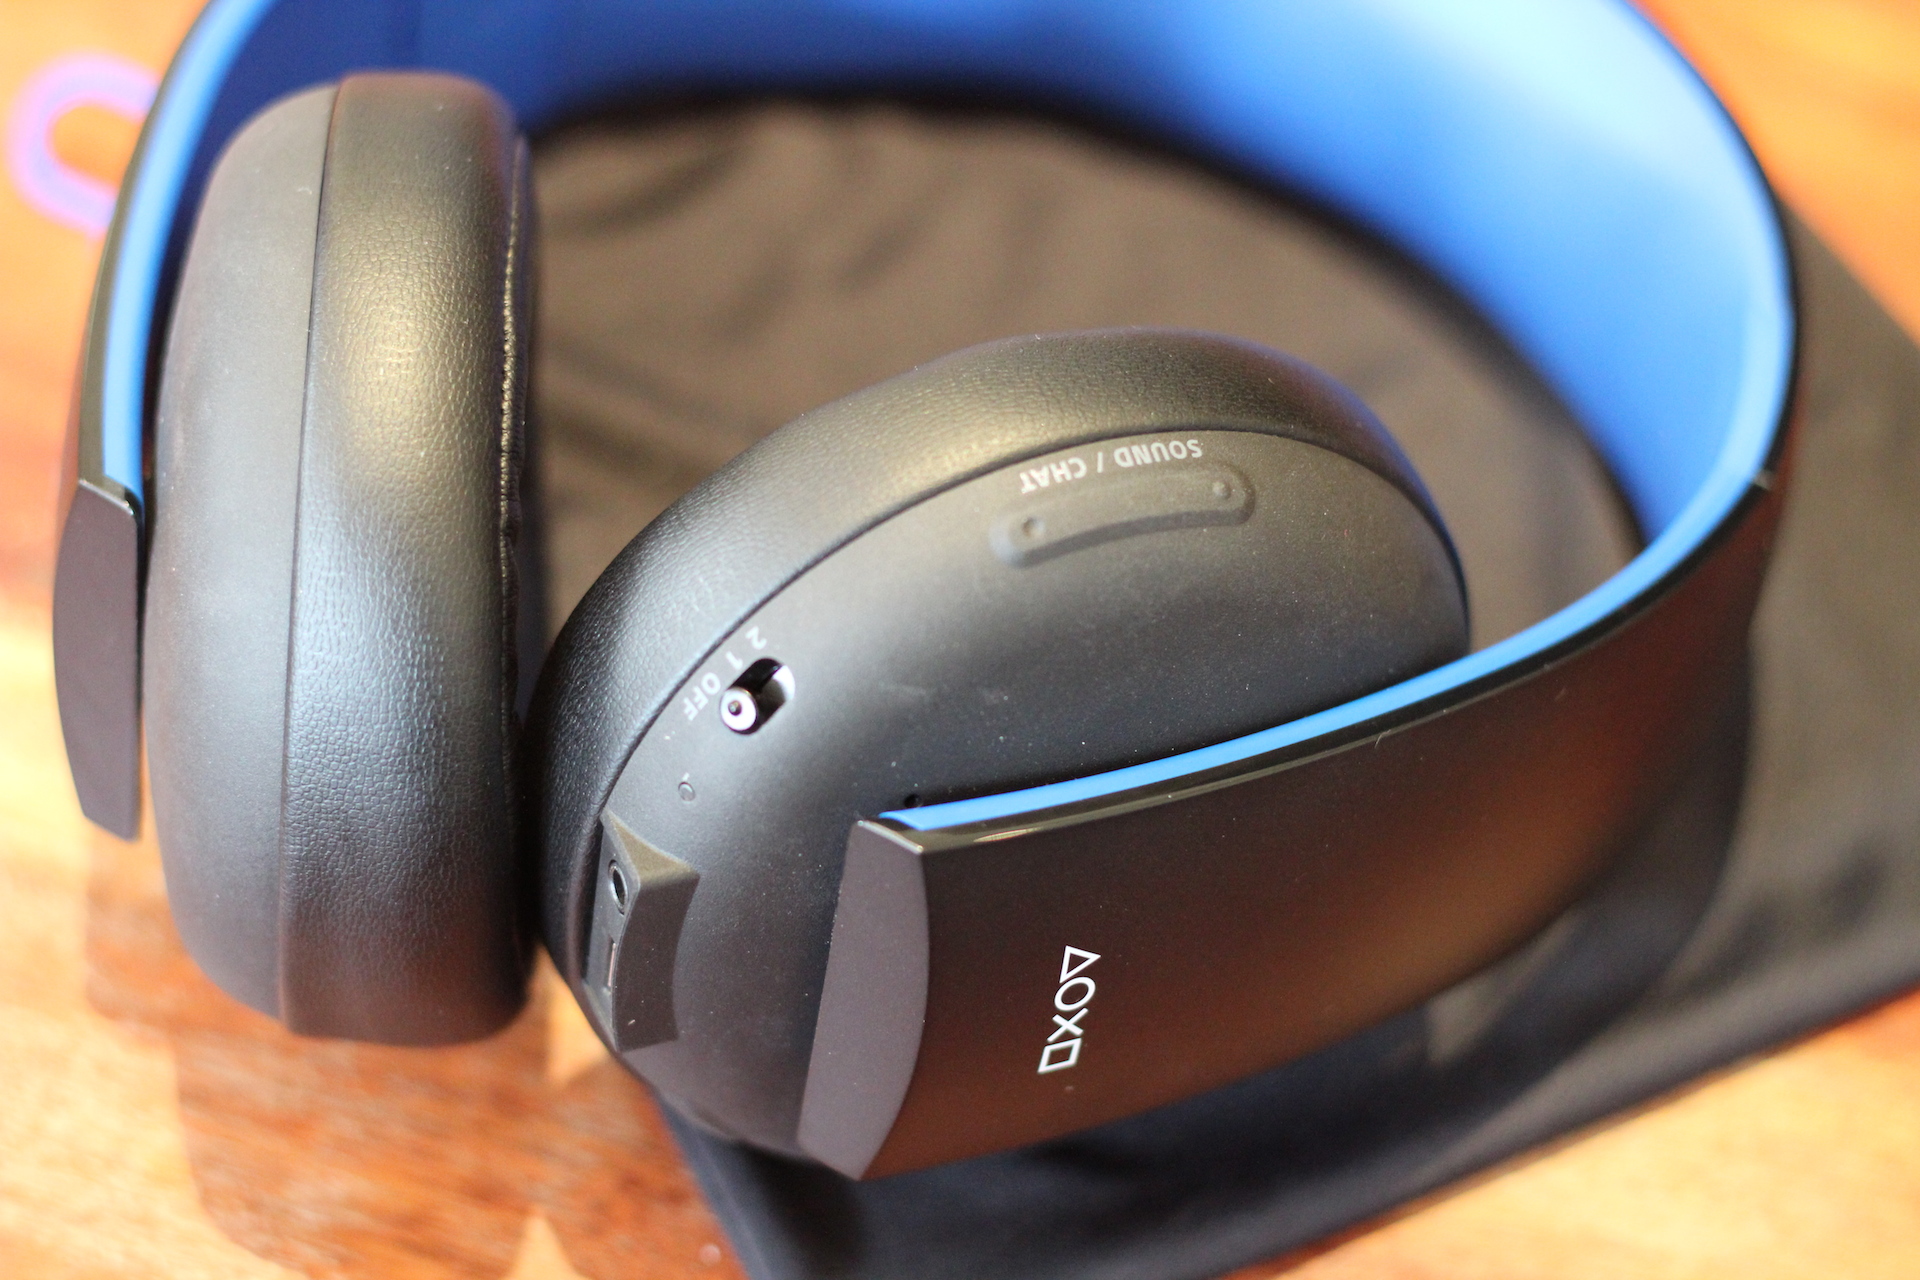 The PlayStation Gold Wireless Headset: Not Bad For A Hundred Bucks